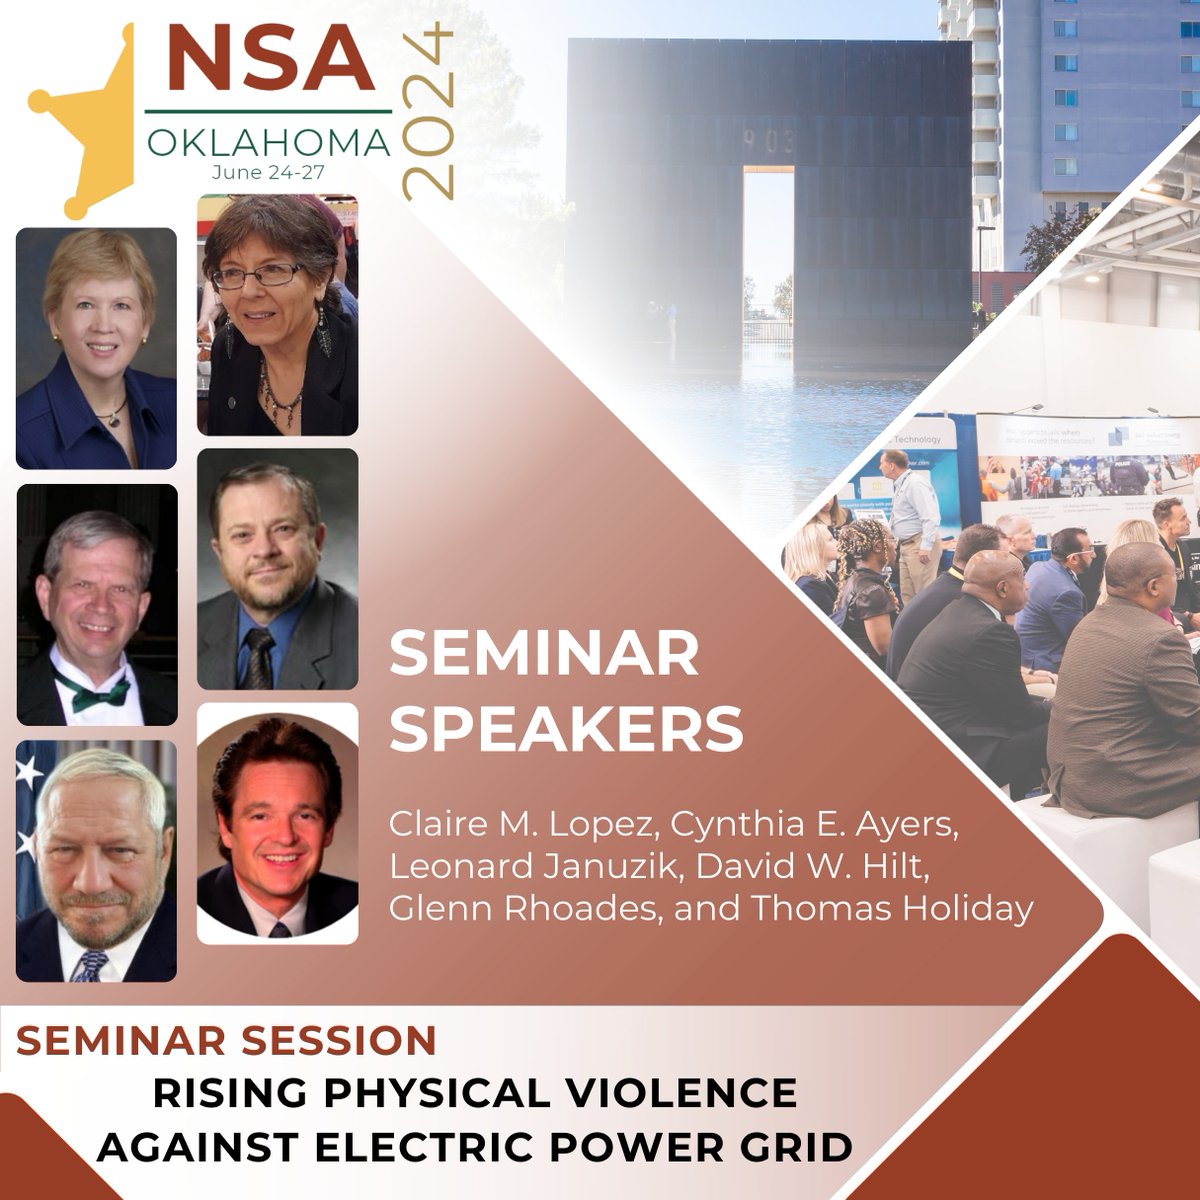 The NSA 2024 Annual Conference Speaker Spotlight continues as we highlight Clare Lopez, Cynthia E. Ayers, Leonard Januzik, David Hilt, Glenn Rhoades, and Thomas Holiday #Sheriffs2024 2023 Broke all records for physical violence committed against the U.S. Electric Power Grid